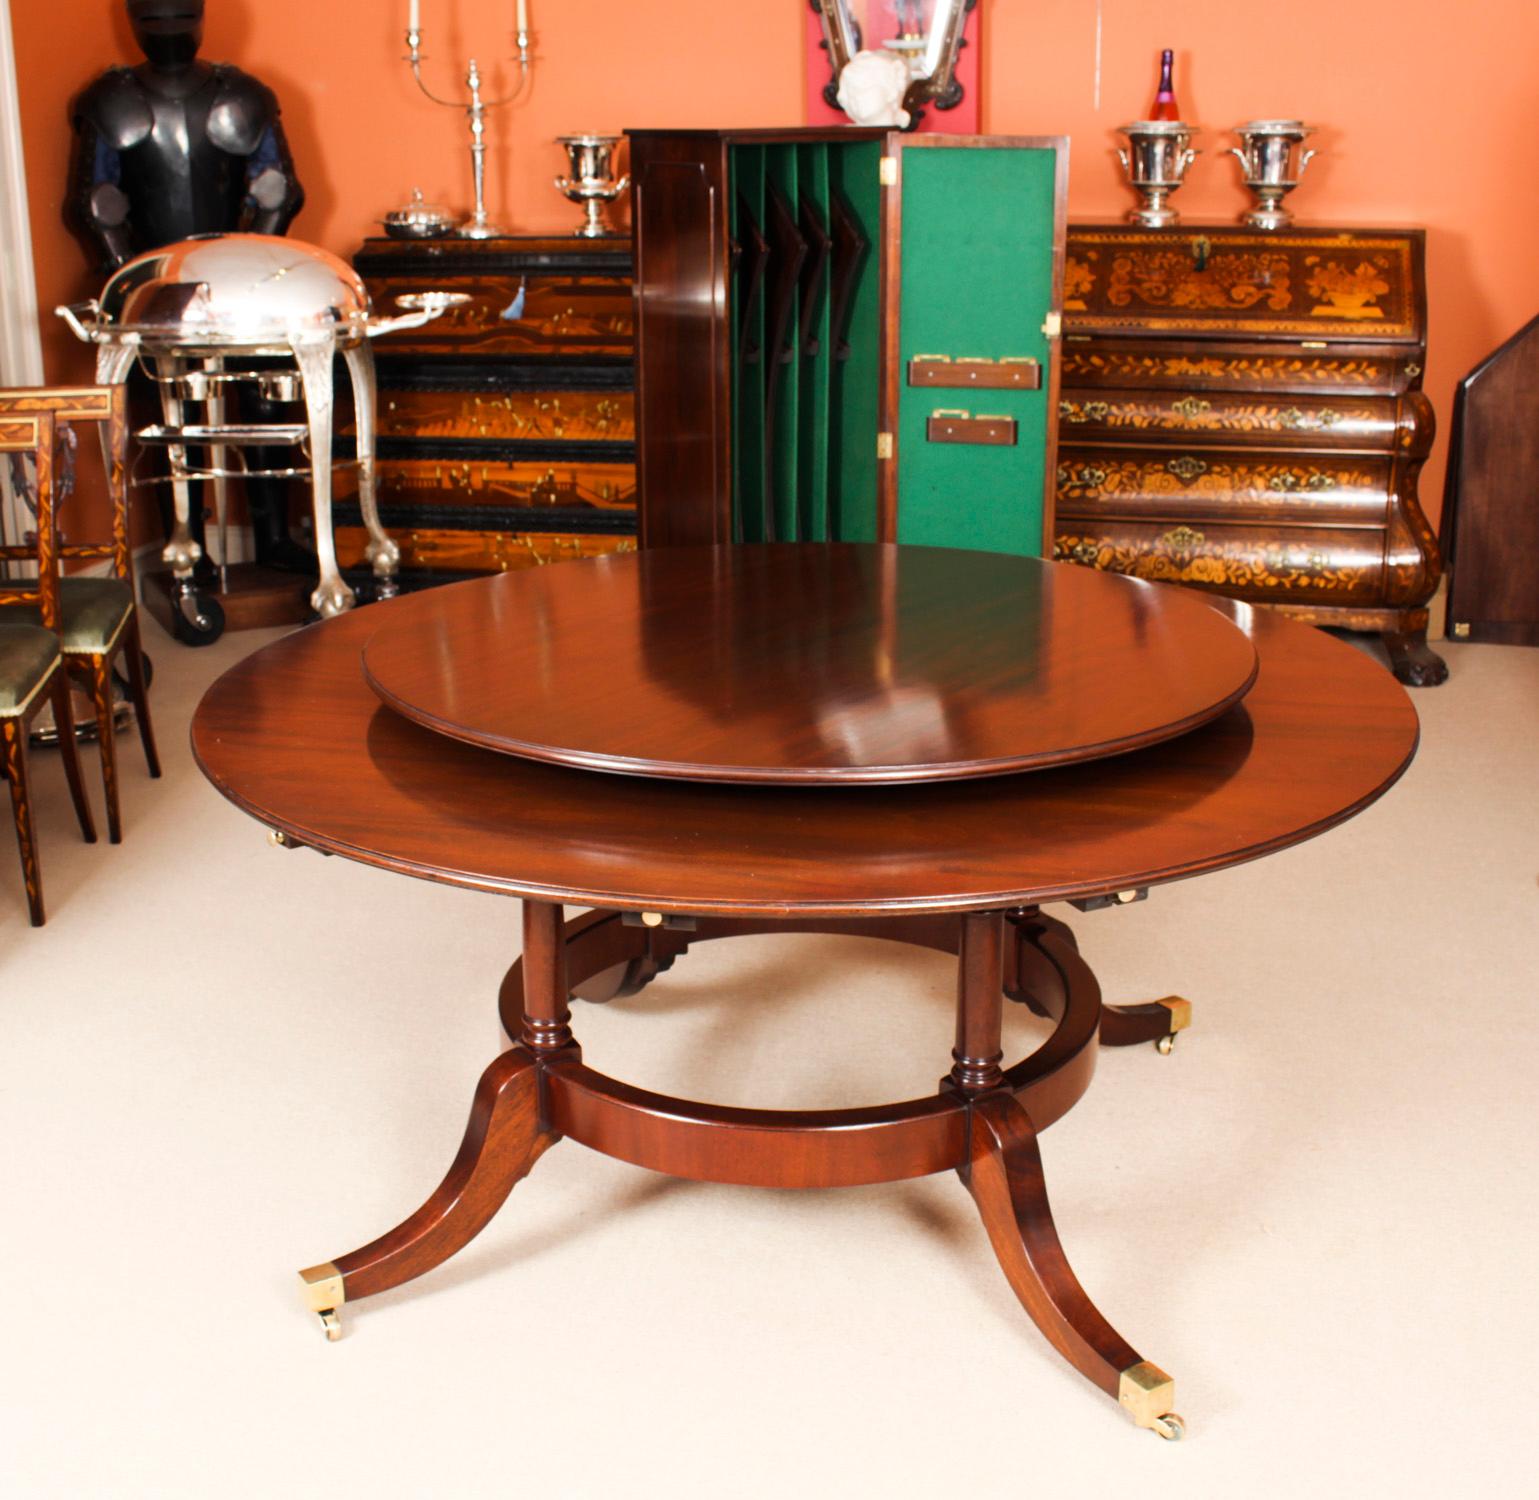 This beautiful dining set comprises a Regency Revival Jupe style dining table mid 20th century in date, with the original matching lazy susan.

The table has a solid mahogany top with five peripheral leaves that can be added around the circumference